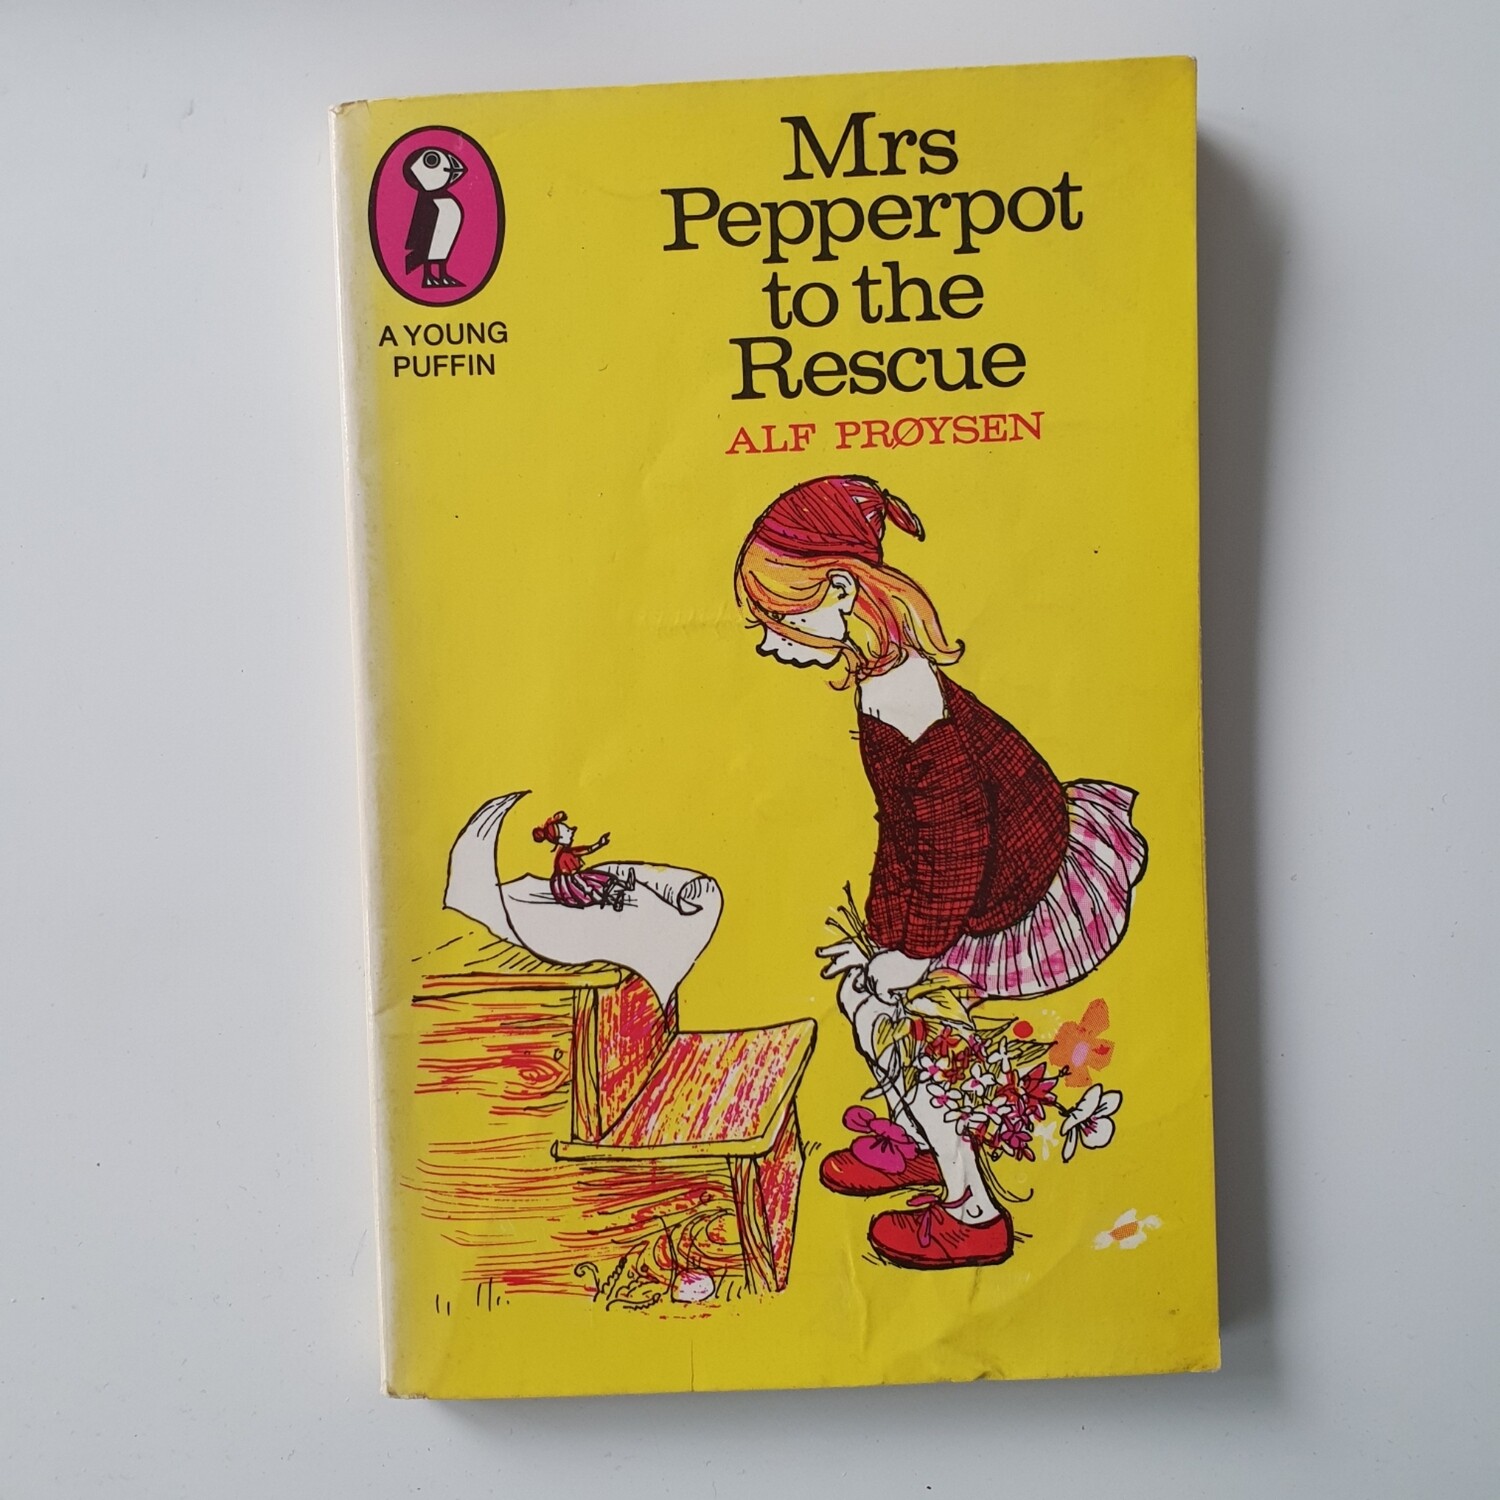 Mrs Pepperpot to the Rescue - made from a paperback book